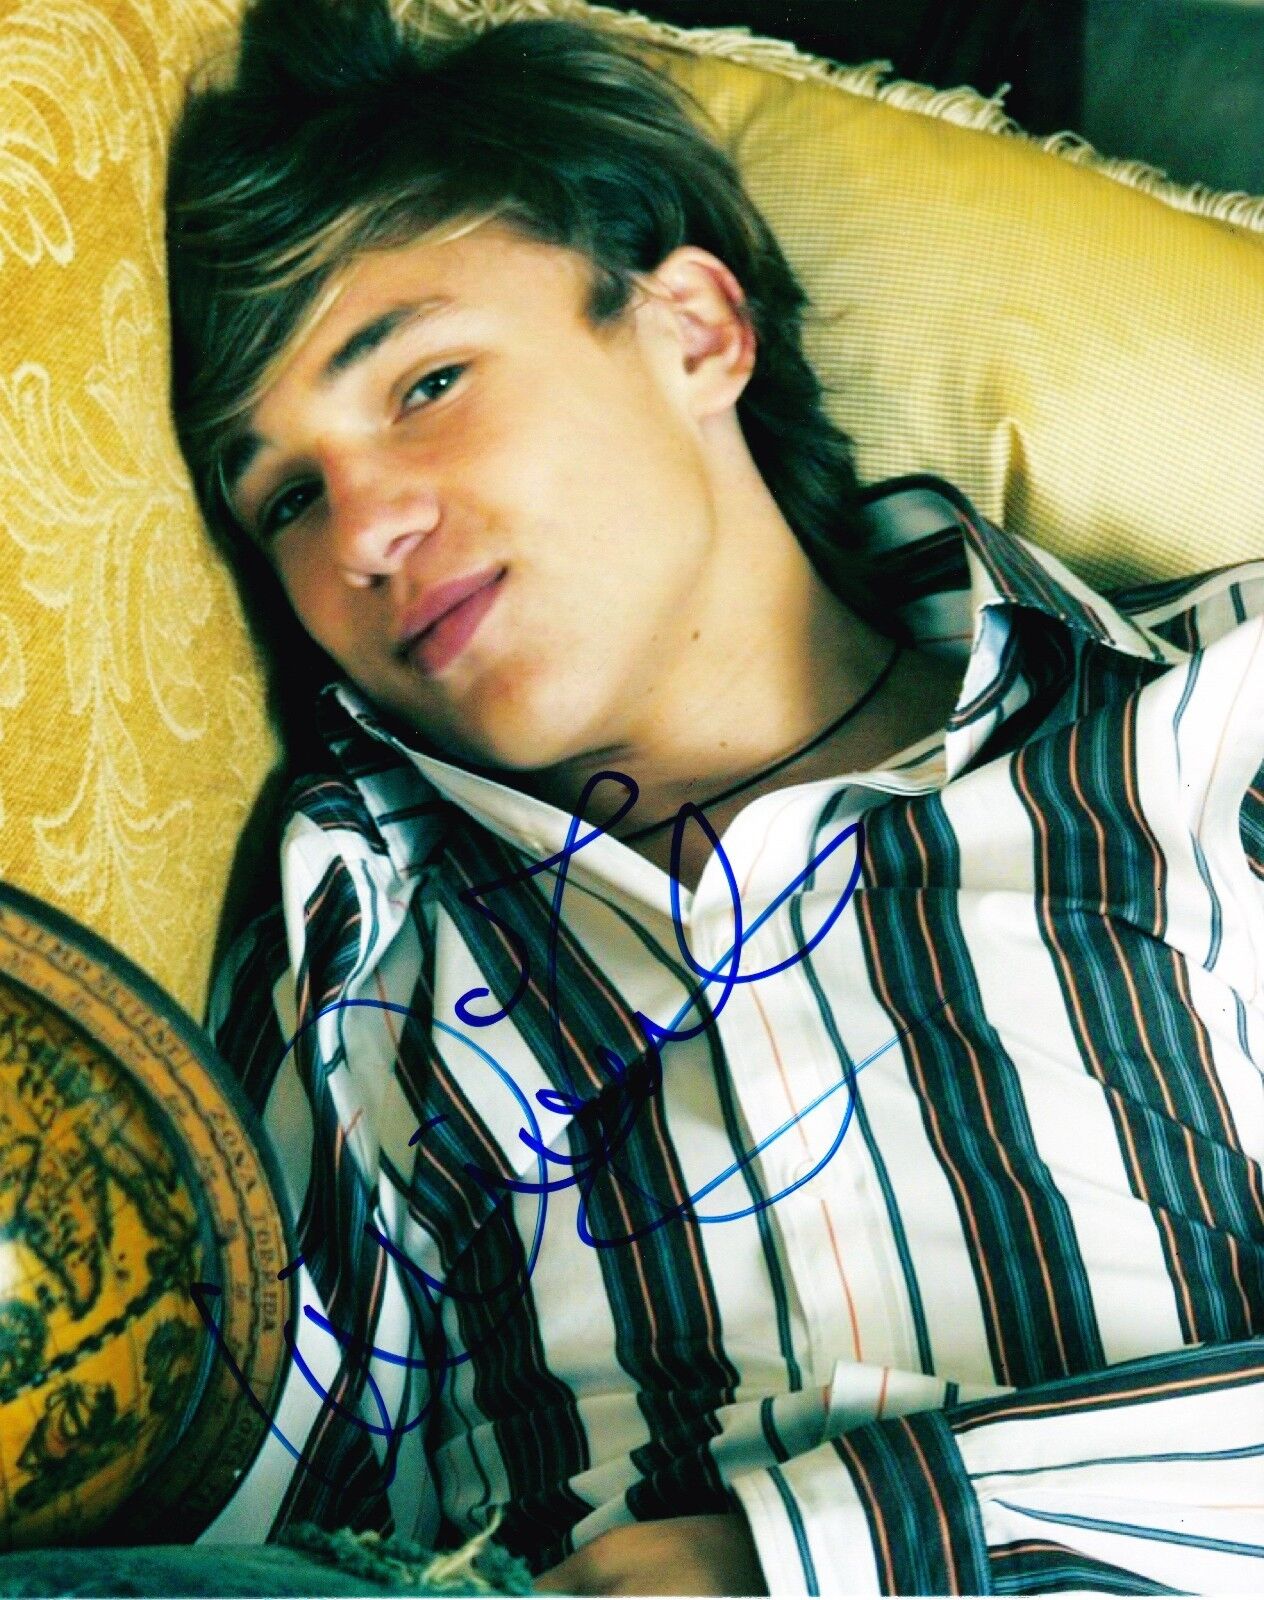 WILLIAM MOSELEY SIGNED 8X10 PHOTO AUTHENTIC AUTOGRAPH CHRONICLES OF NARINA COA